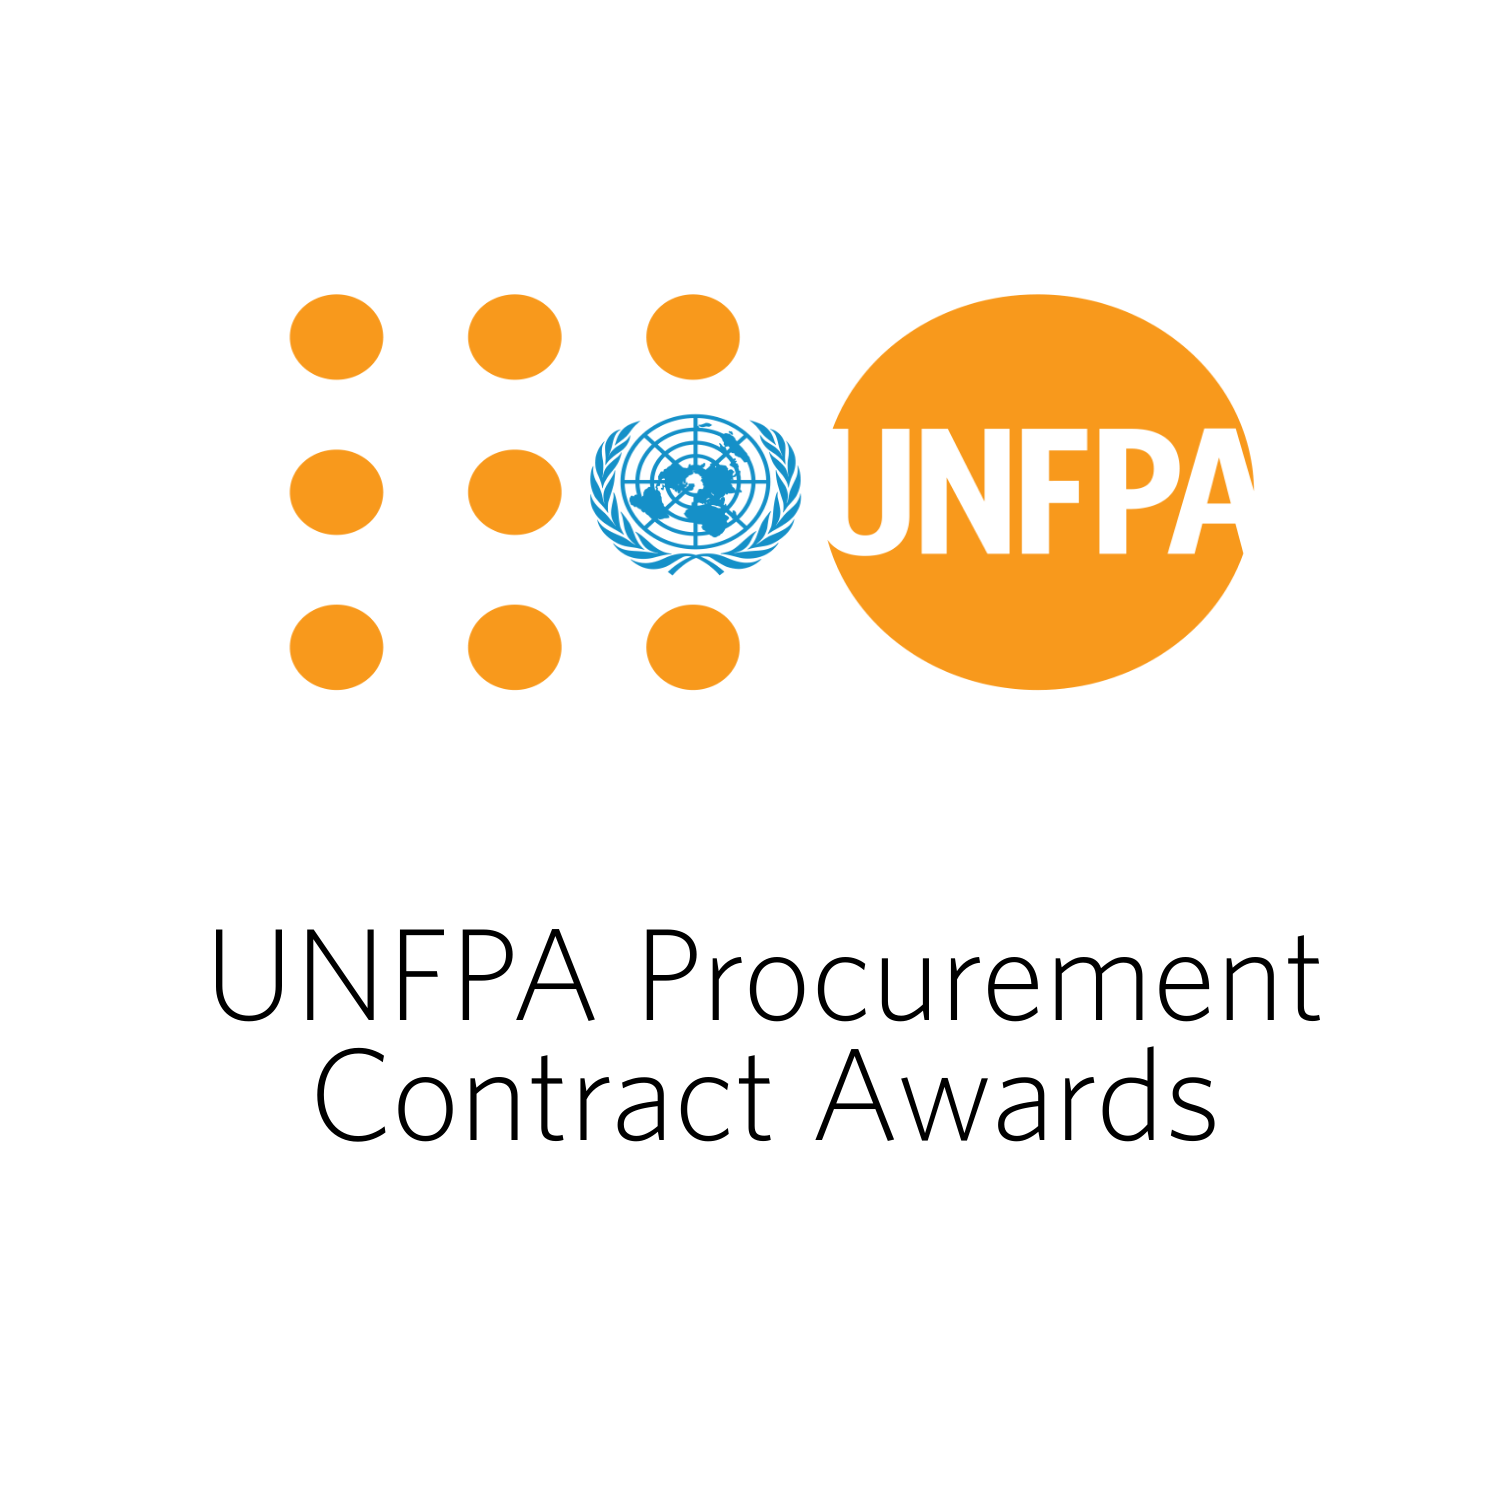 Procurement Contract Awards October 2020 to December 2020